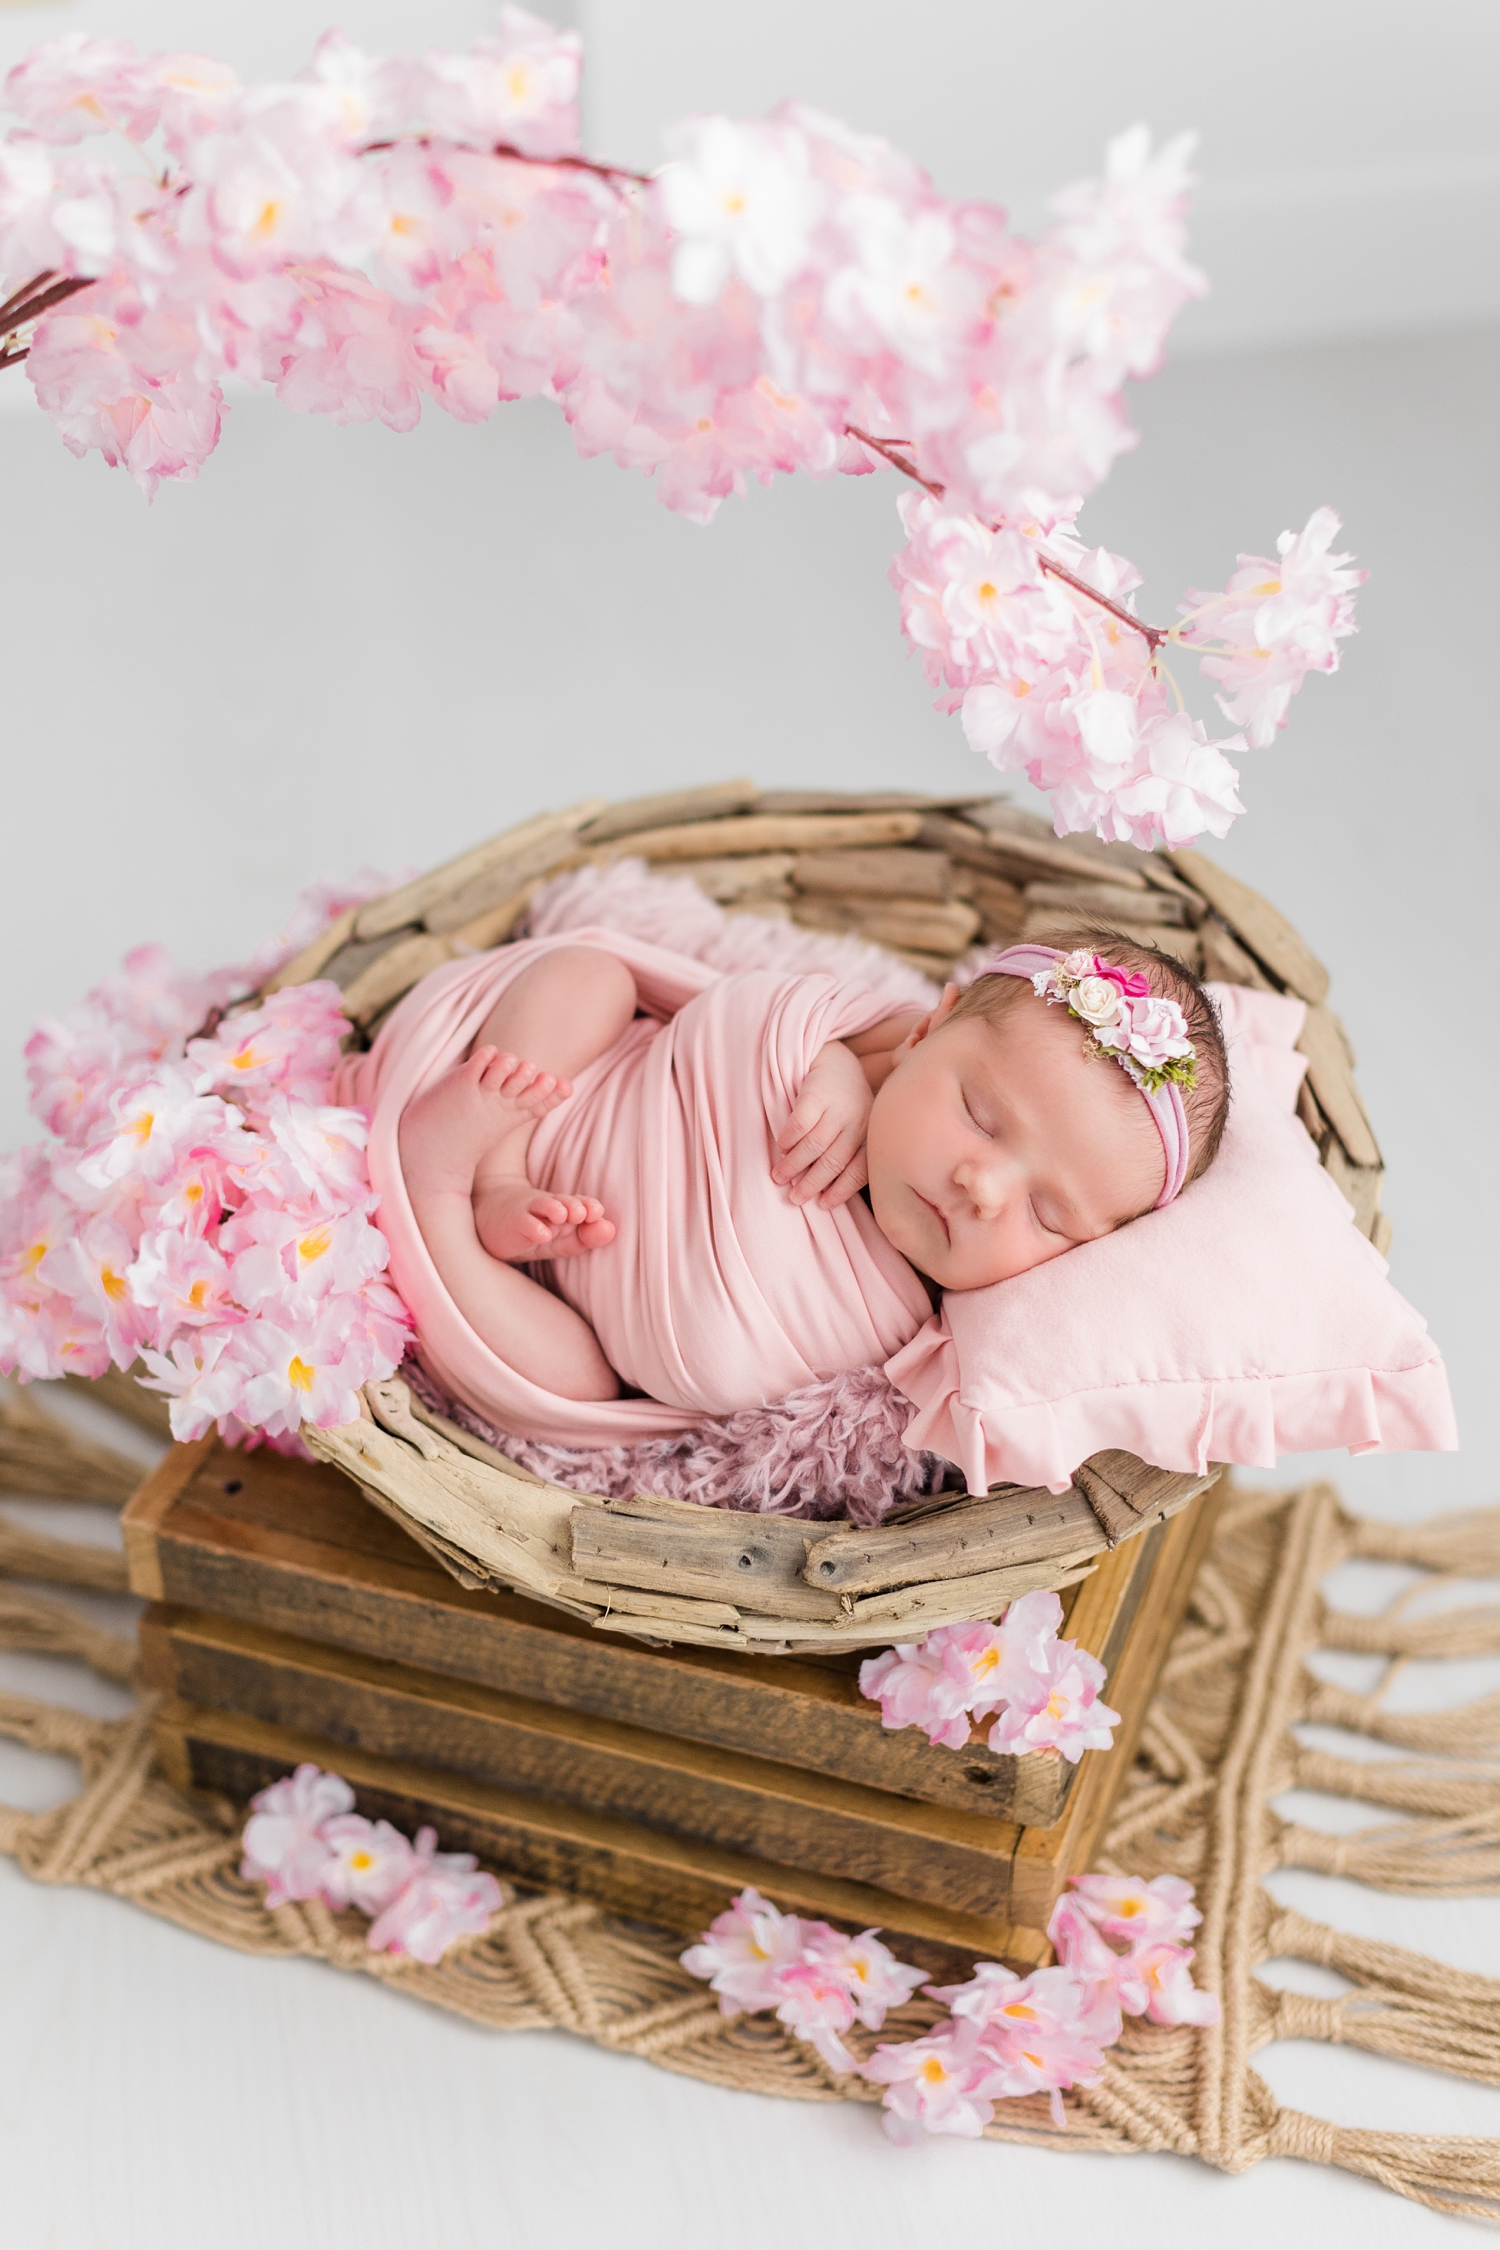 Baby Ivy wrapped in pink nestled in a wooden bowl surrounded by pink cherry blossoms | CB Studio